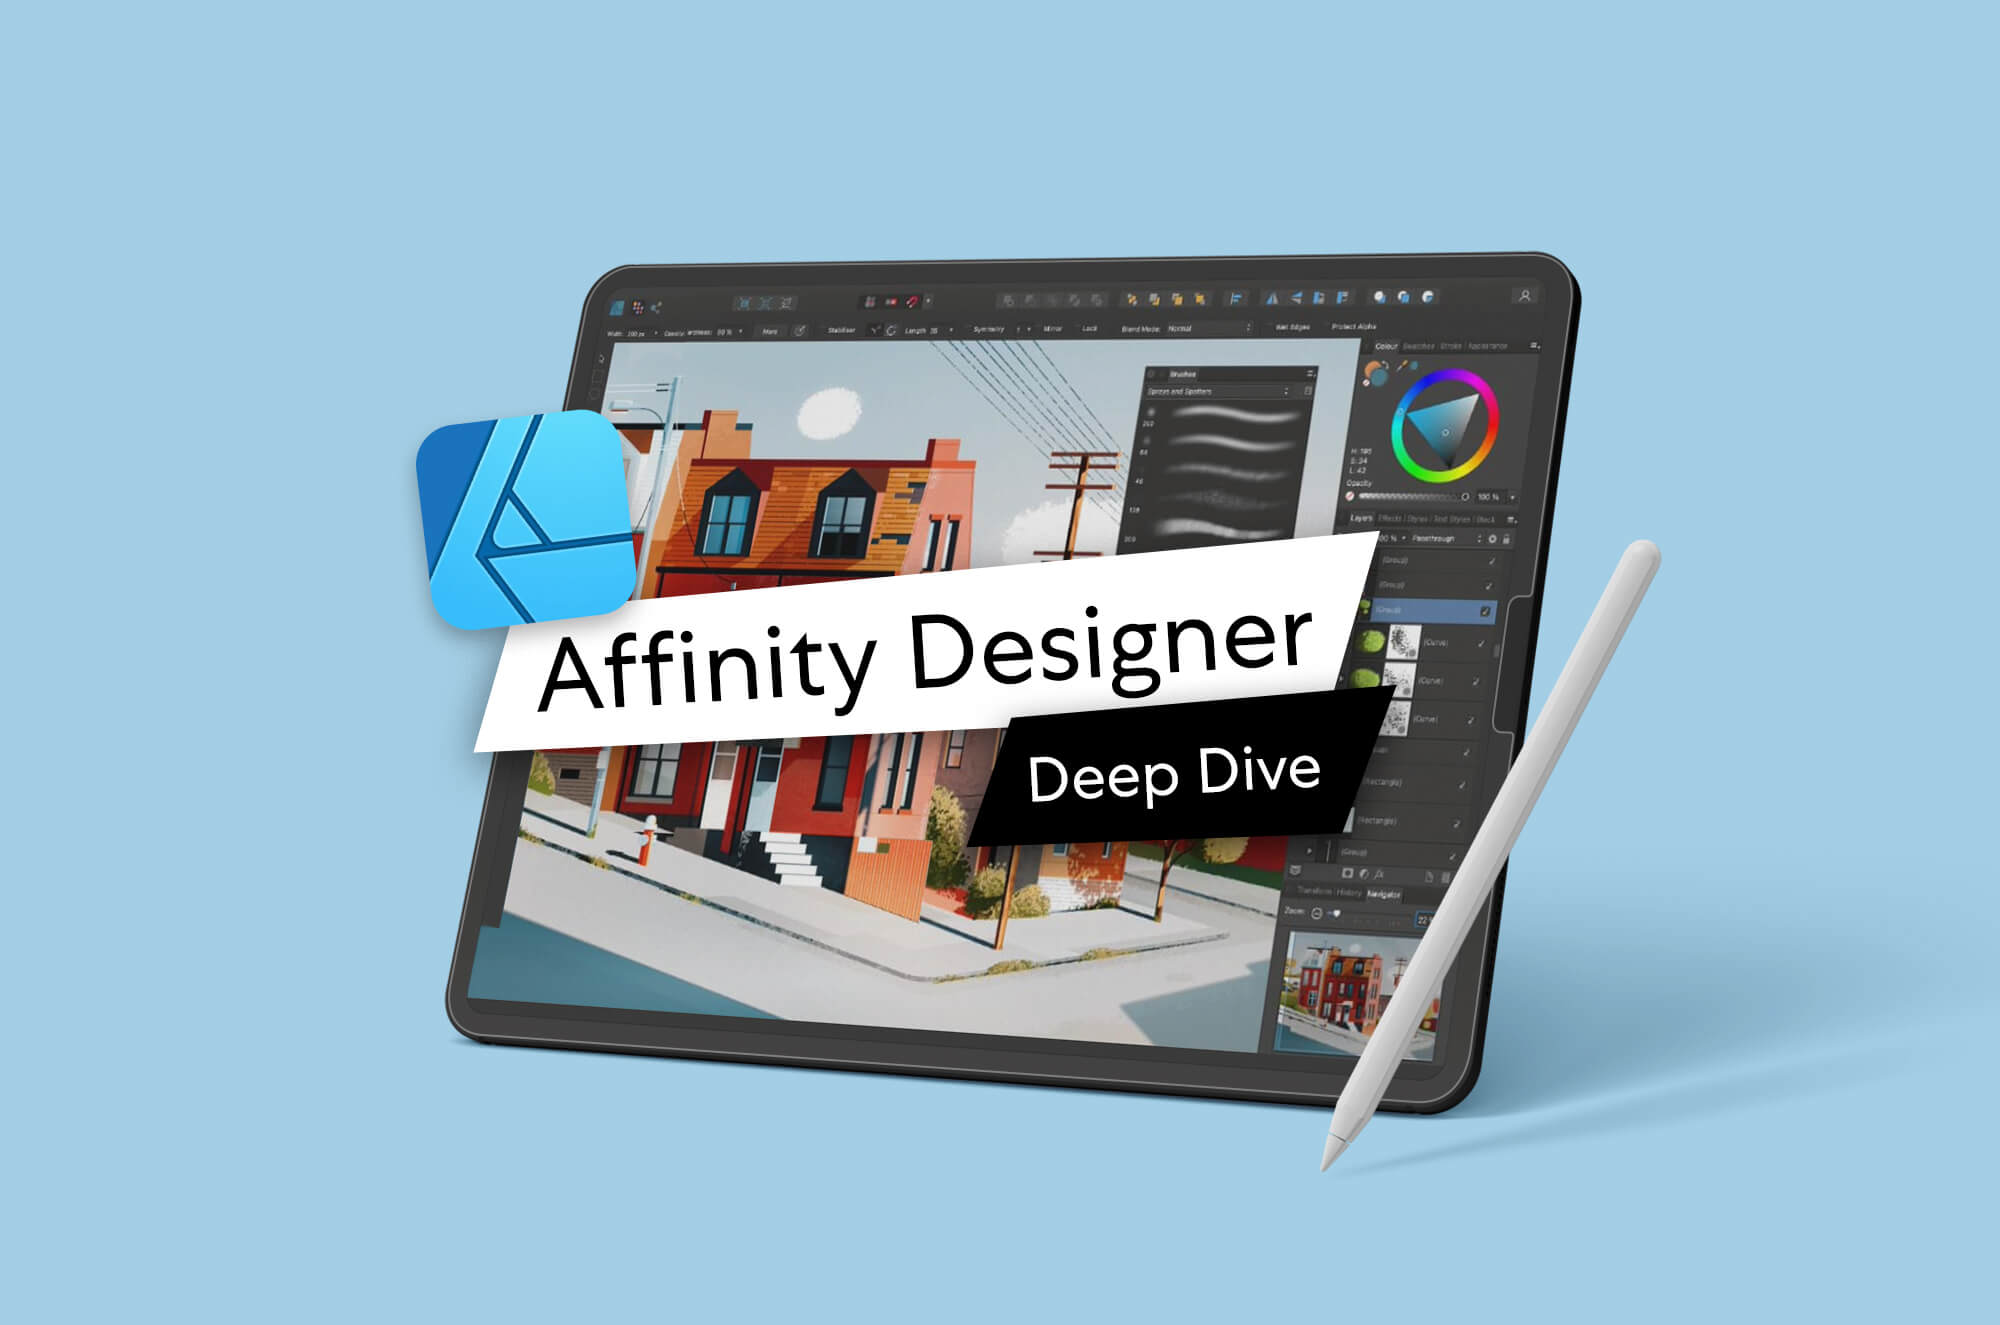 Affinity Designer 211 free download  Software reviews downloads news  free trials freeware and full commercial software  Downloadcrew